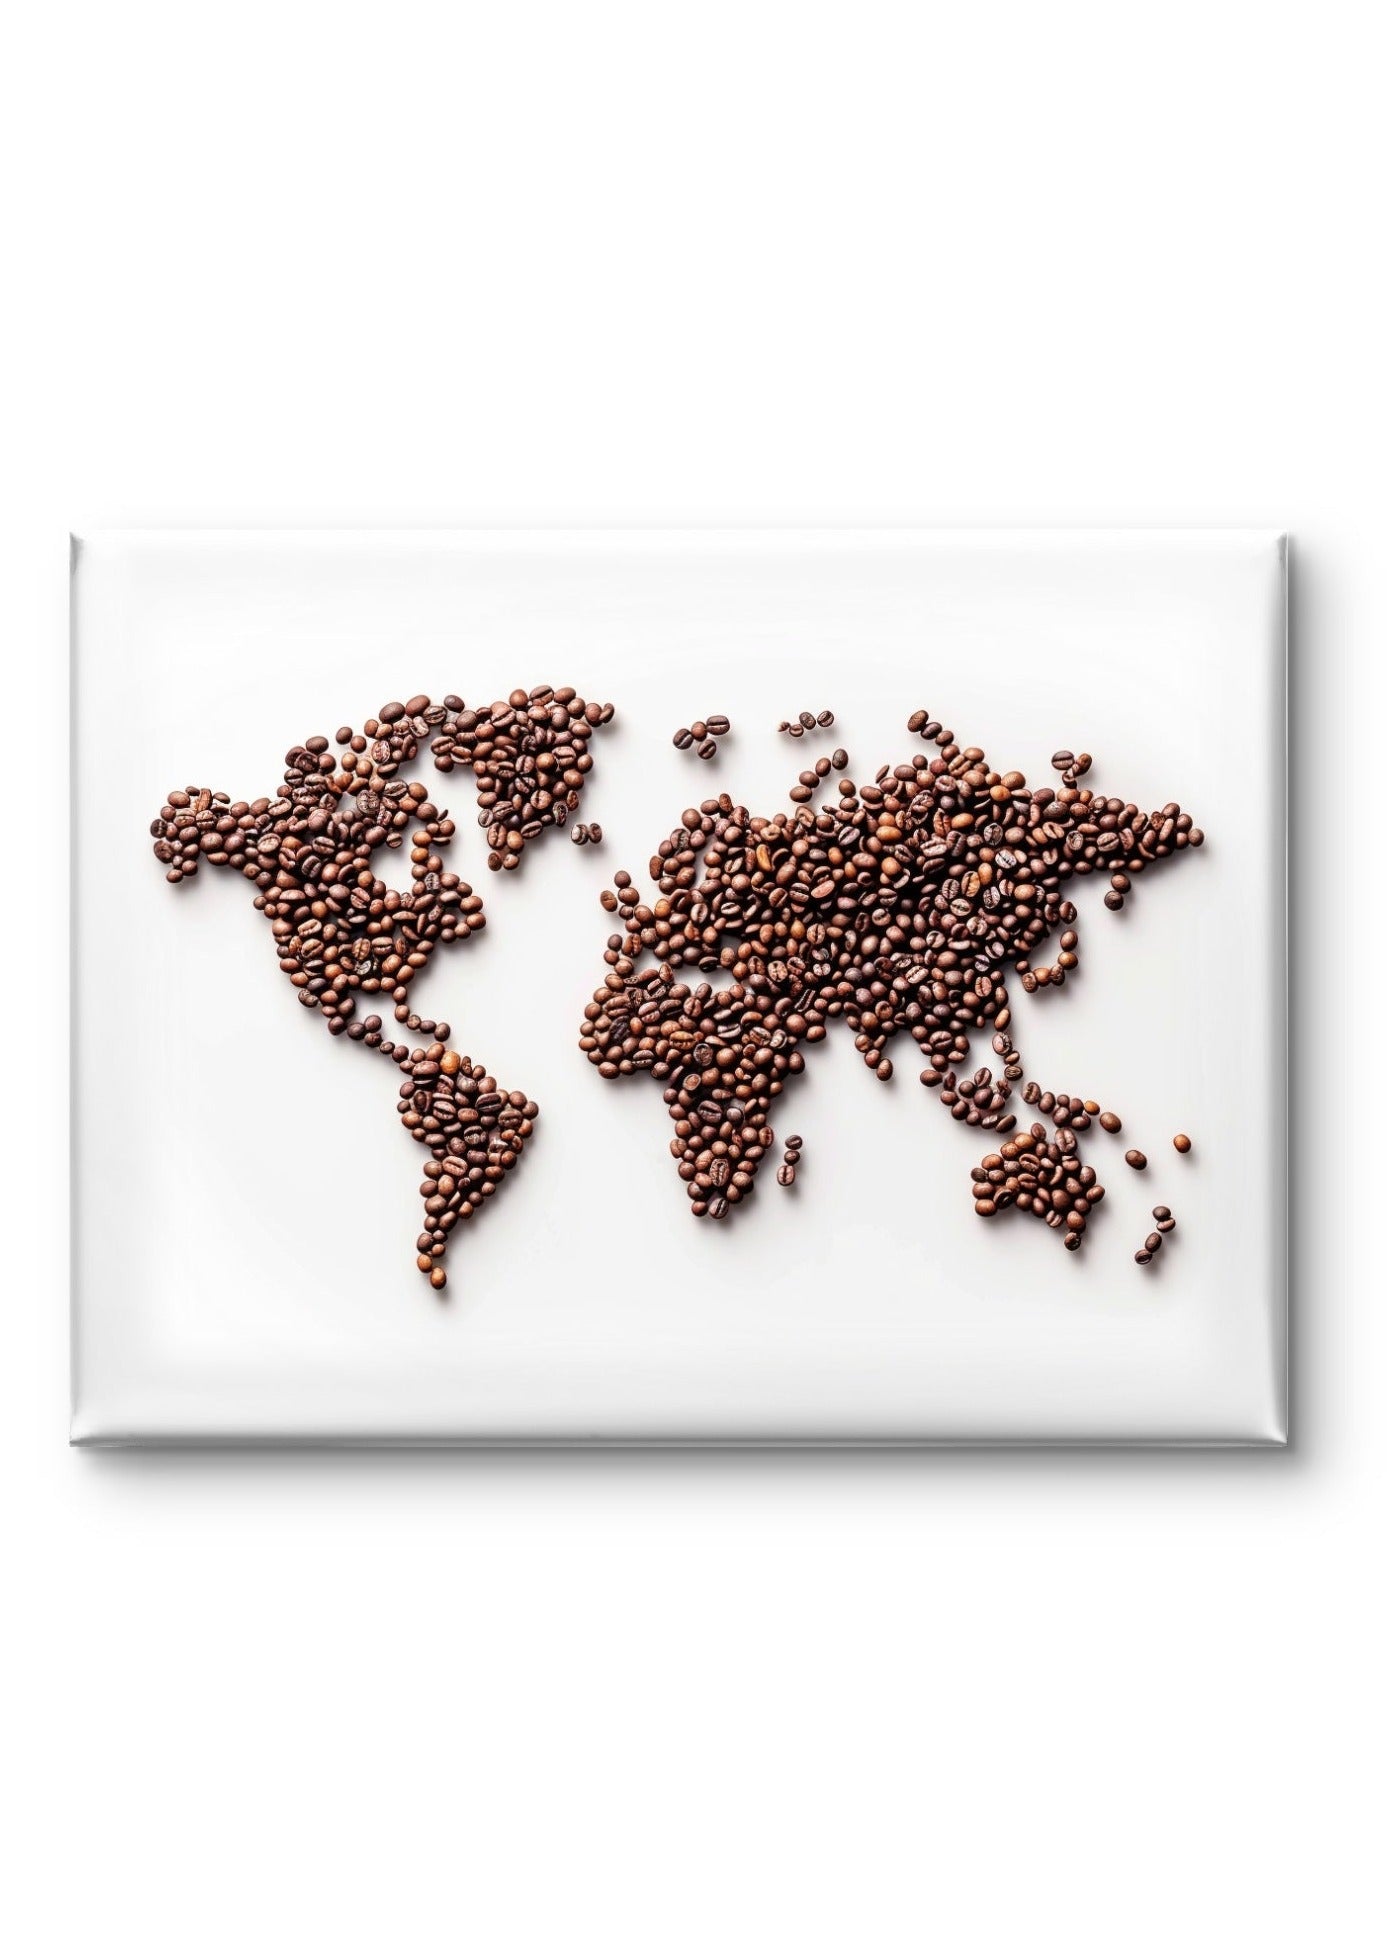 World Map In Beans by Coffee Couture